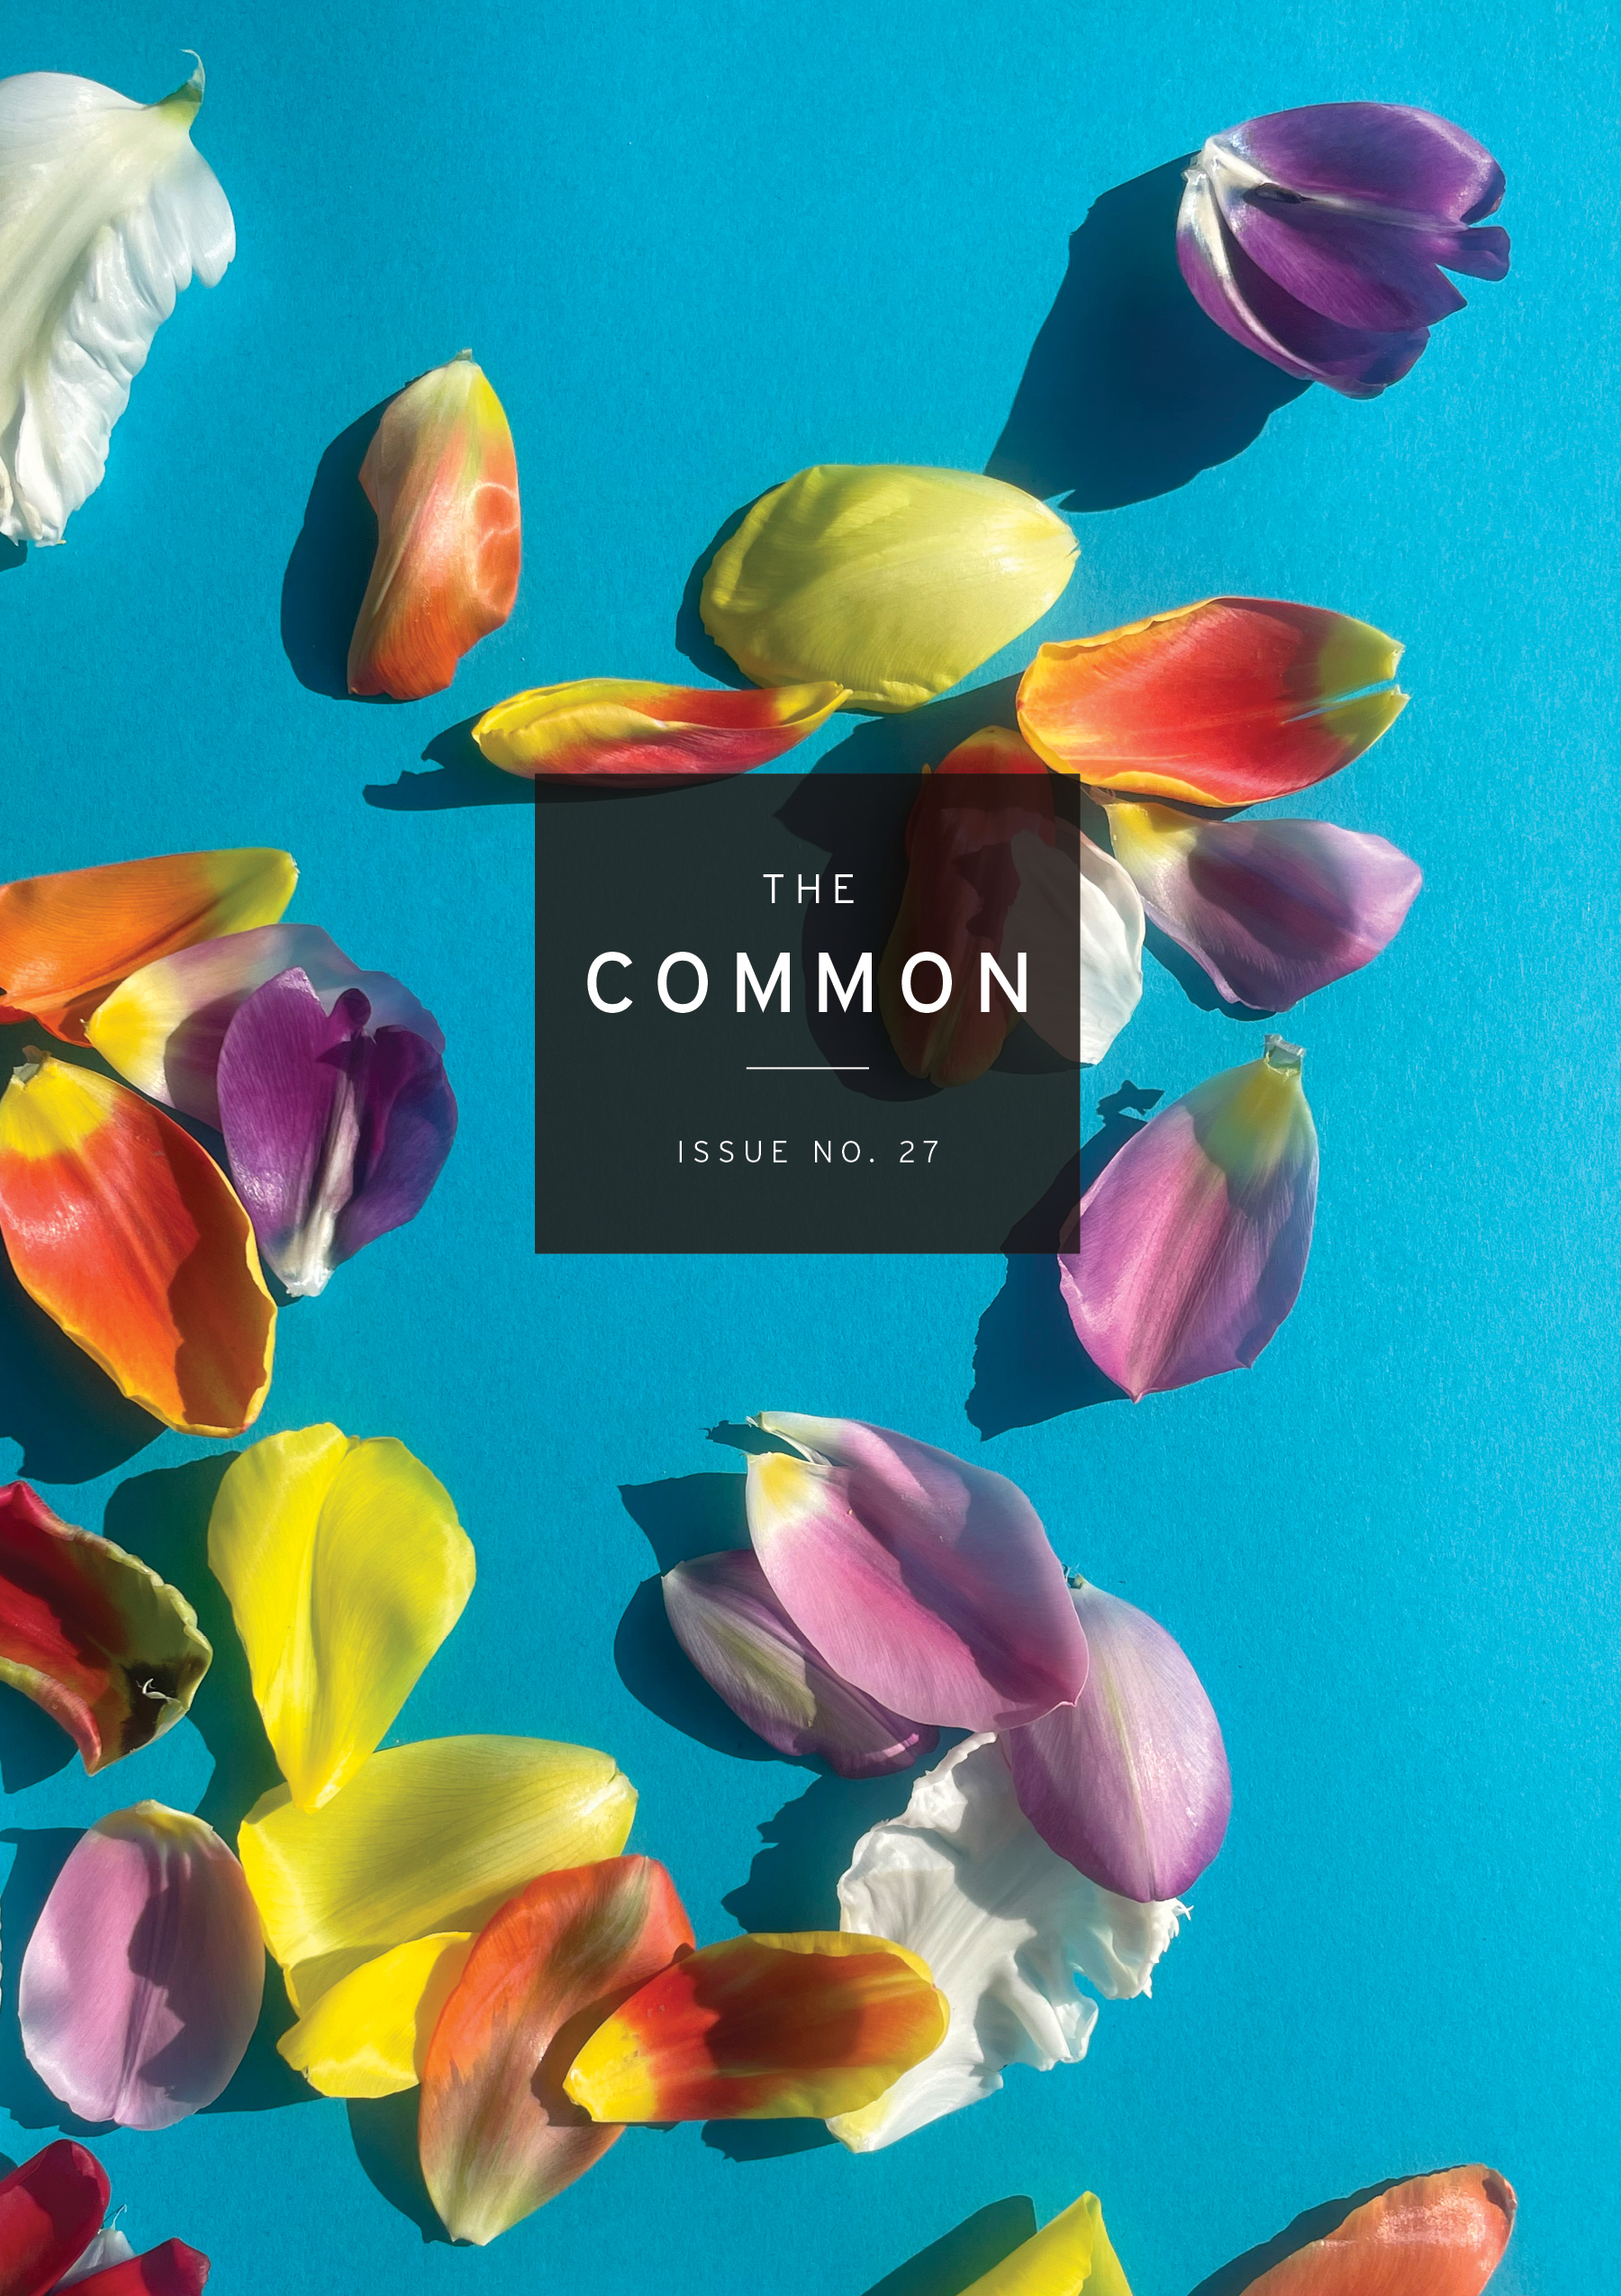 The Common’s Issue 27 Launch Party